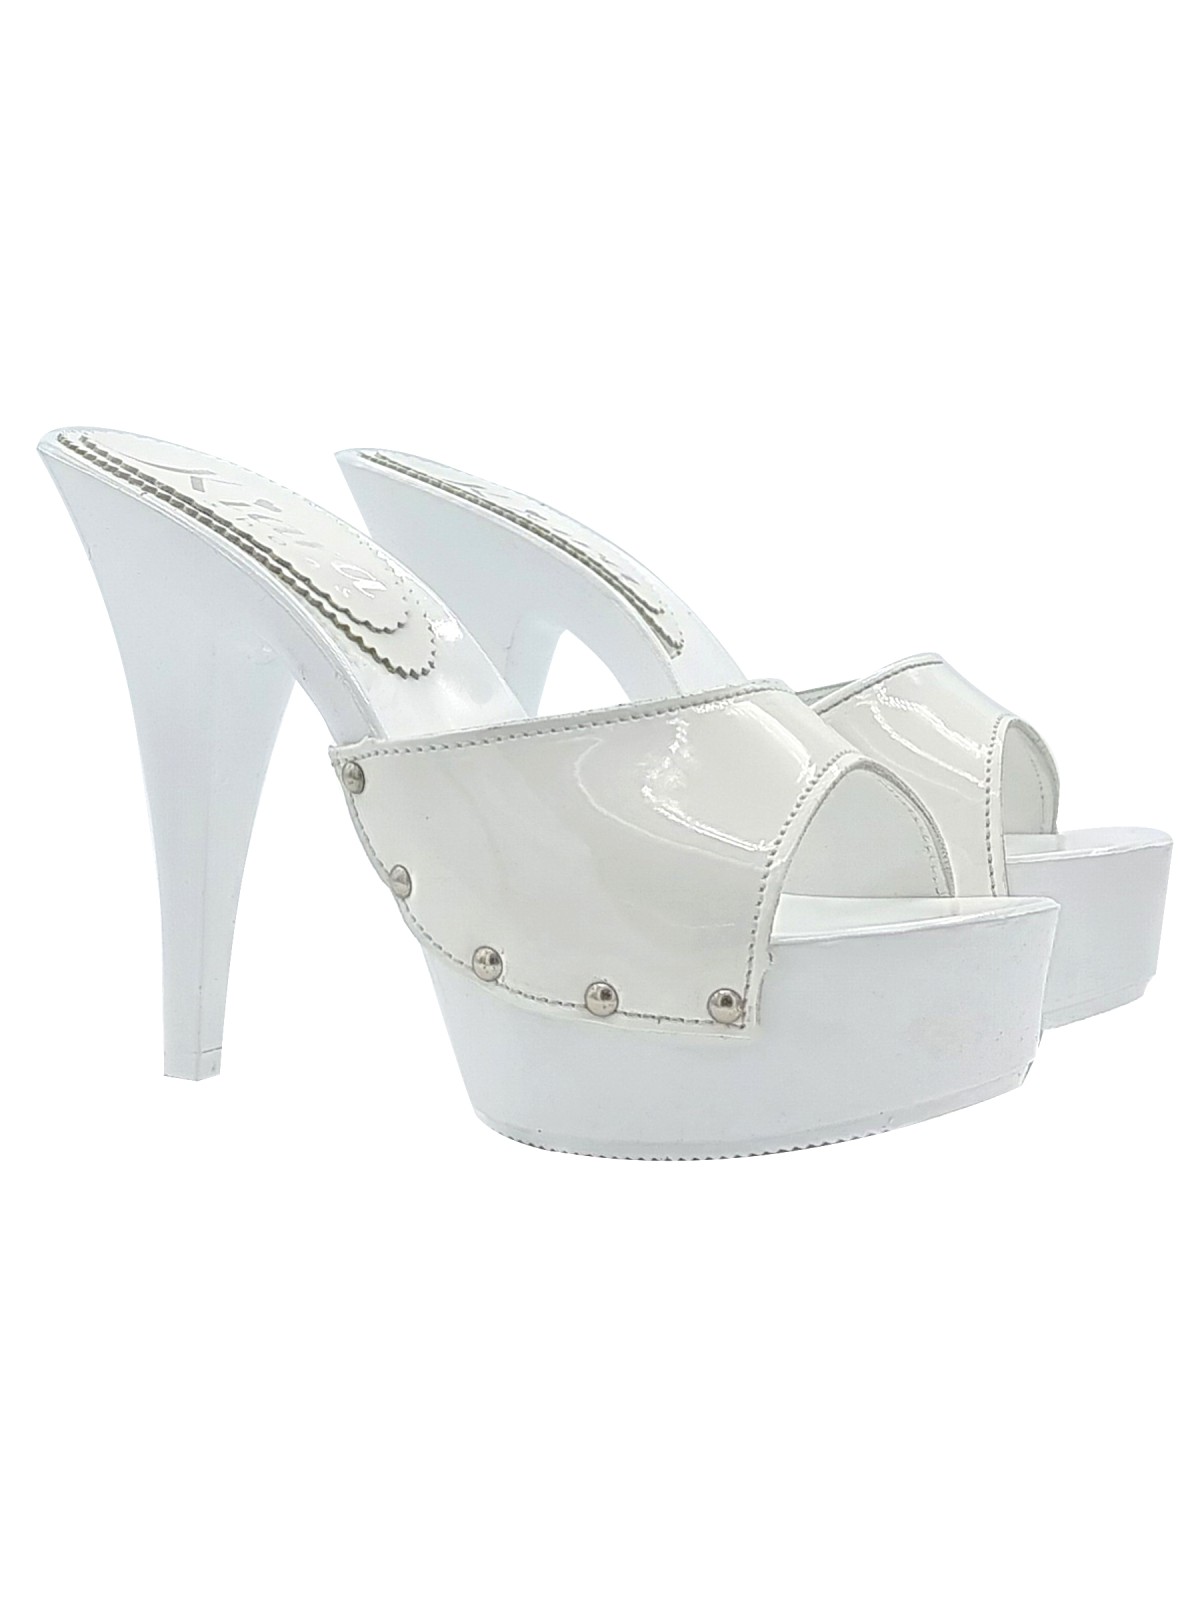 Tony Bianco Colette White Pearl high heel shoes Women's size 7(s)